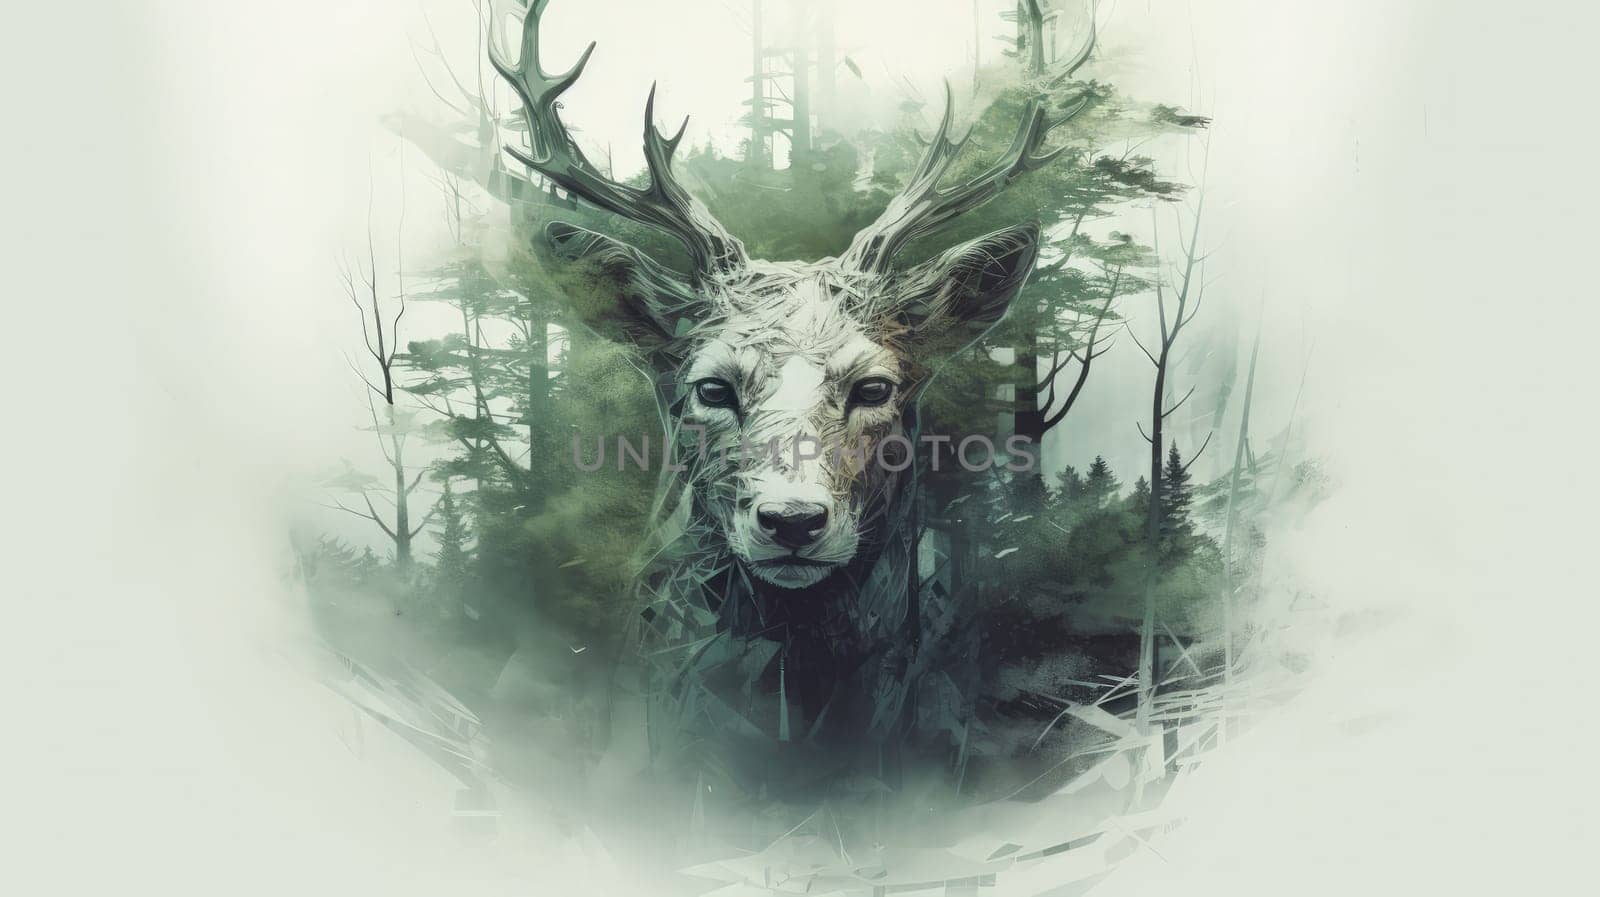 A forest spirit portrayed through double exposure, the ethereal and mystical blending of natural elements creating a harmonious and enchanting visual narrative by Kadula